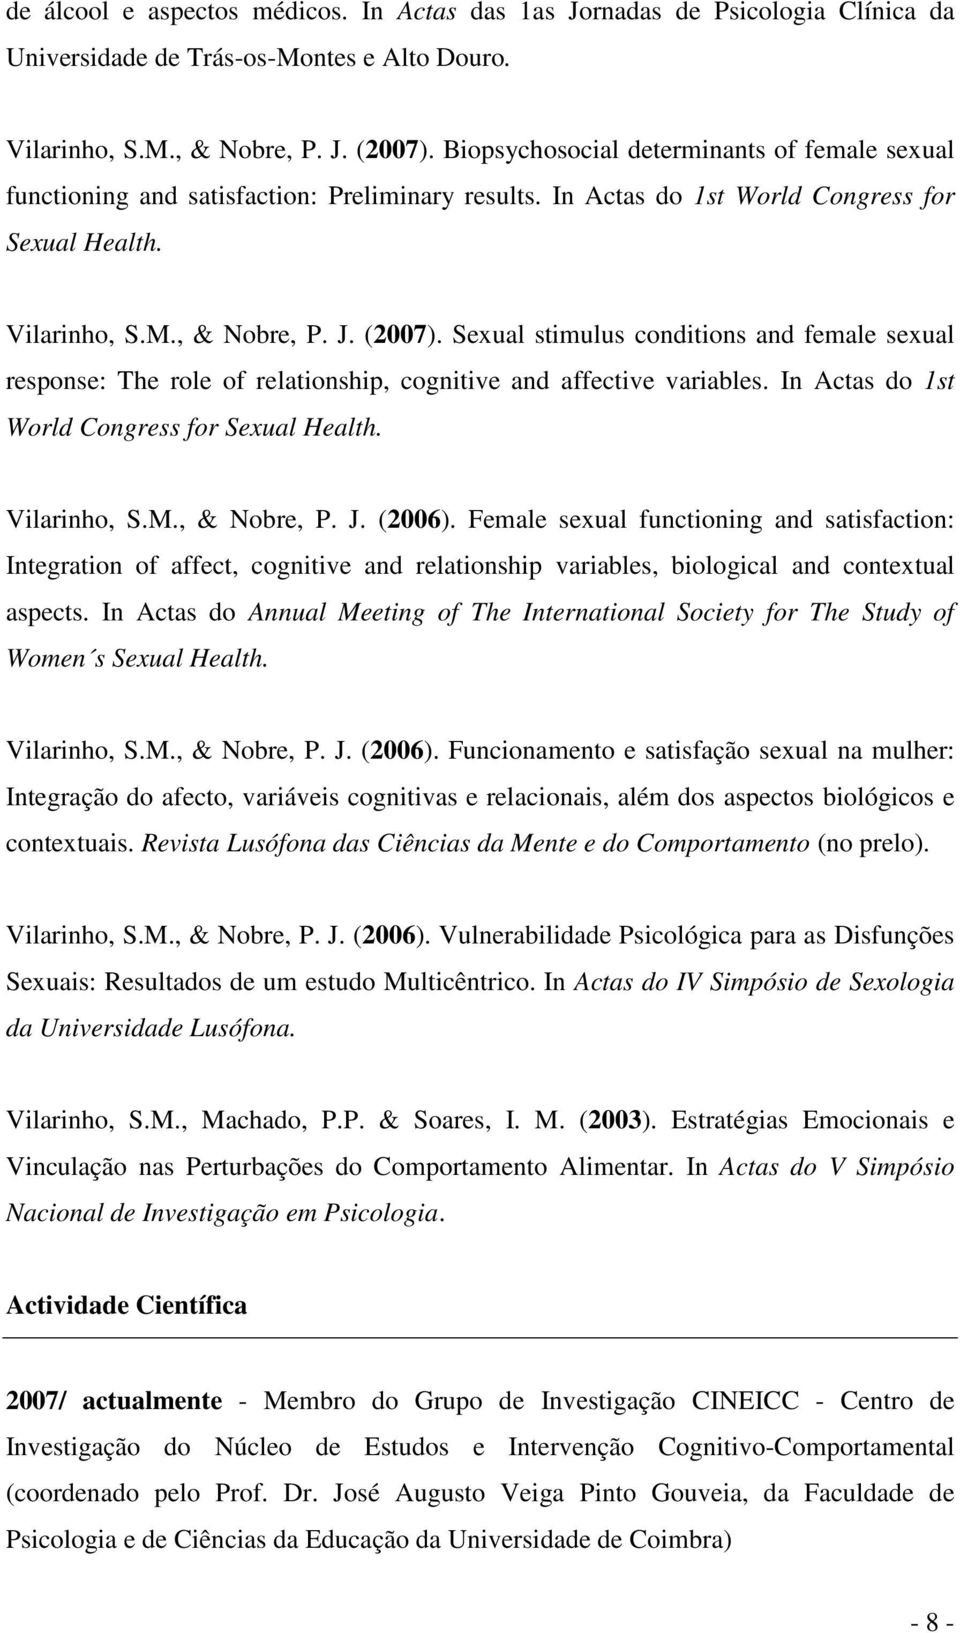 Sexual stimulus conditions and female sexual response: The role of relationship, cognitive and affective variables. In Actas do 1st World Congress for Sexual Health. Vilarinho, S.M., & Nobre, P. J.